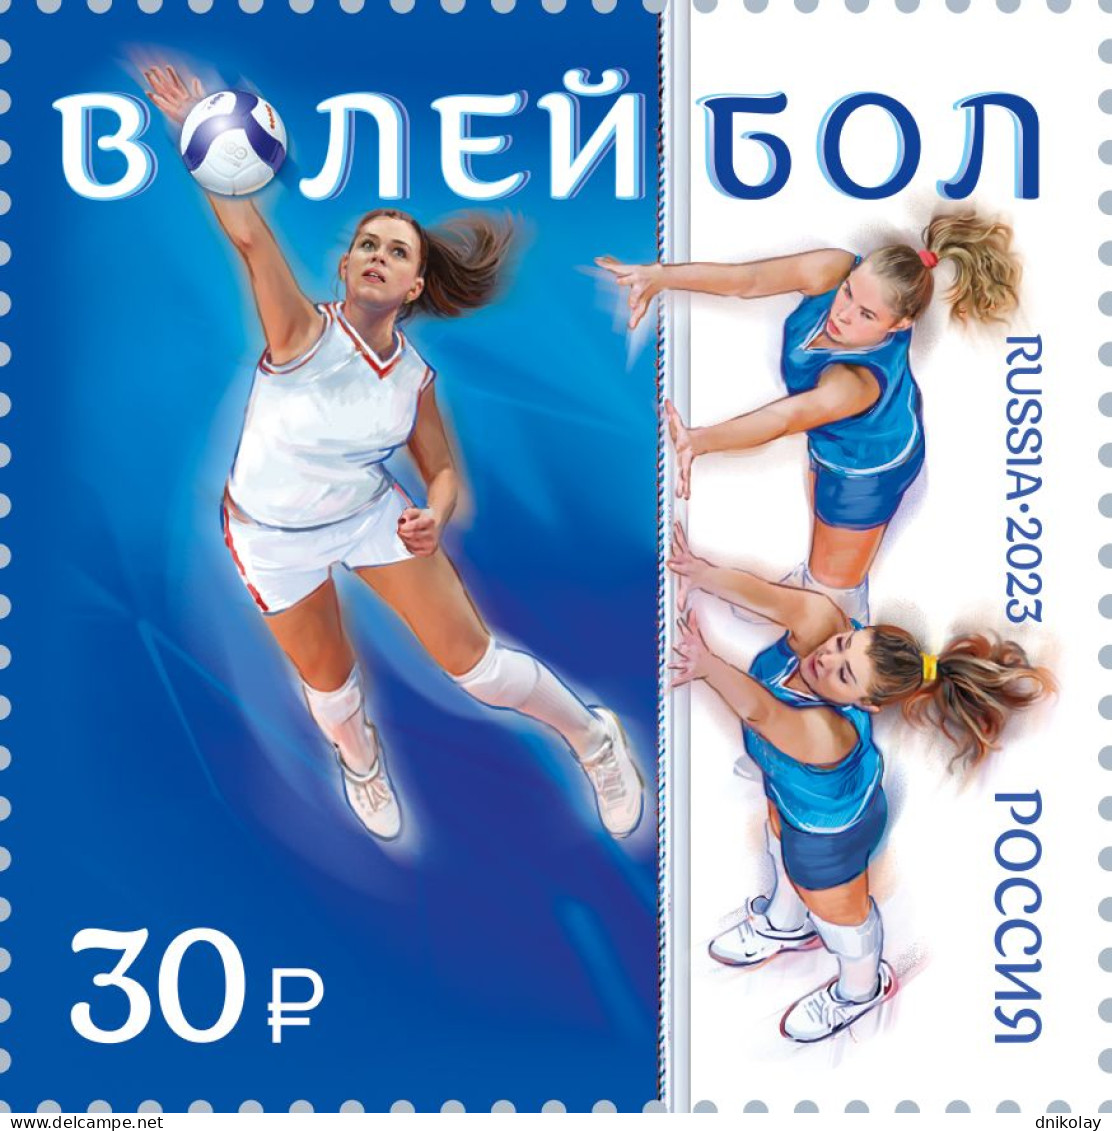 2023 3425 Russia Sports - Volleyball MNH - Unused Stamps